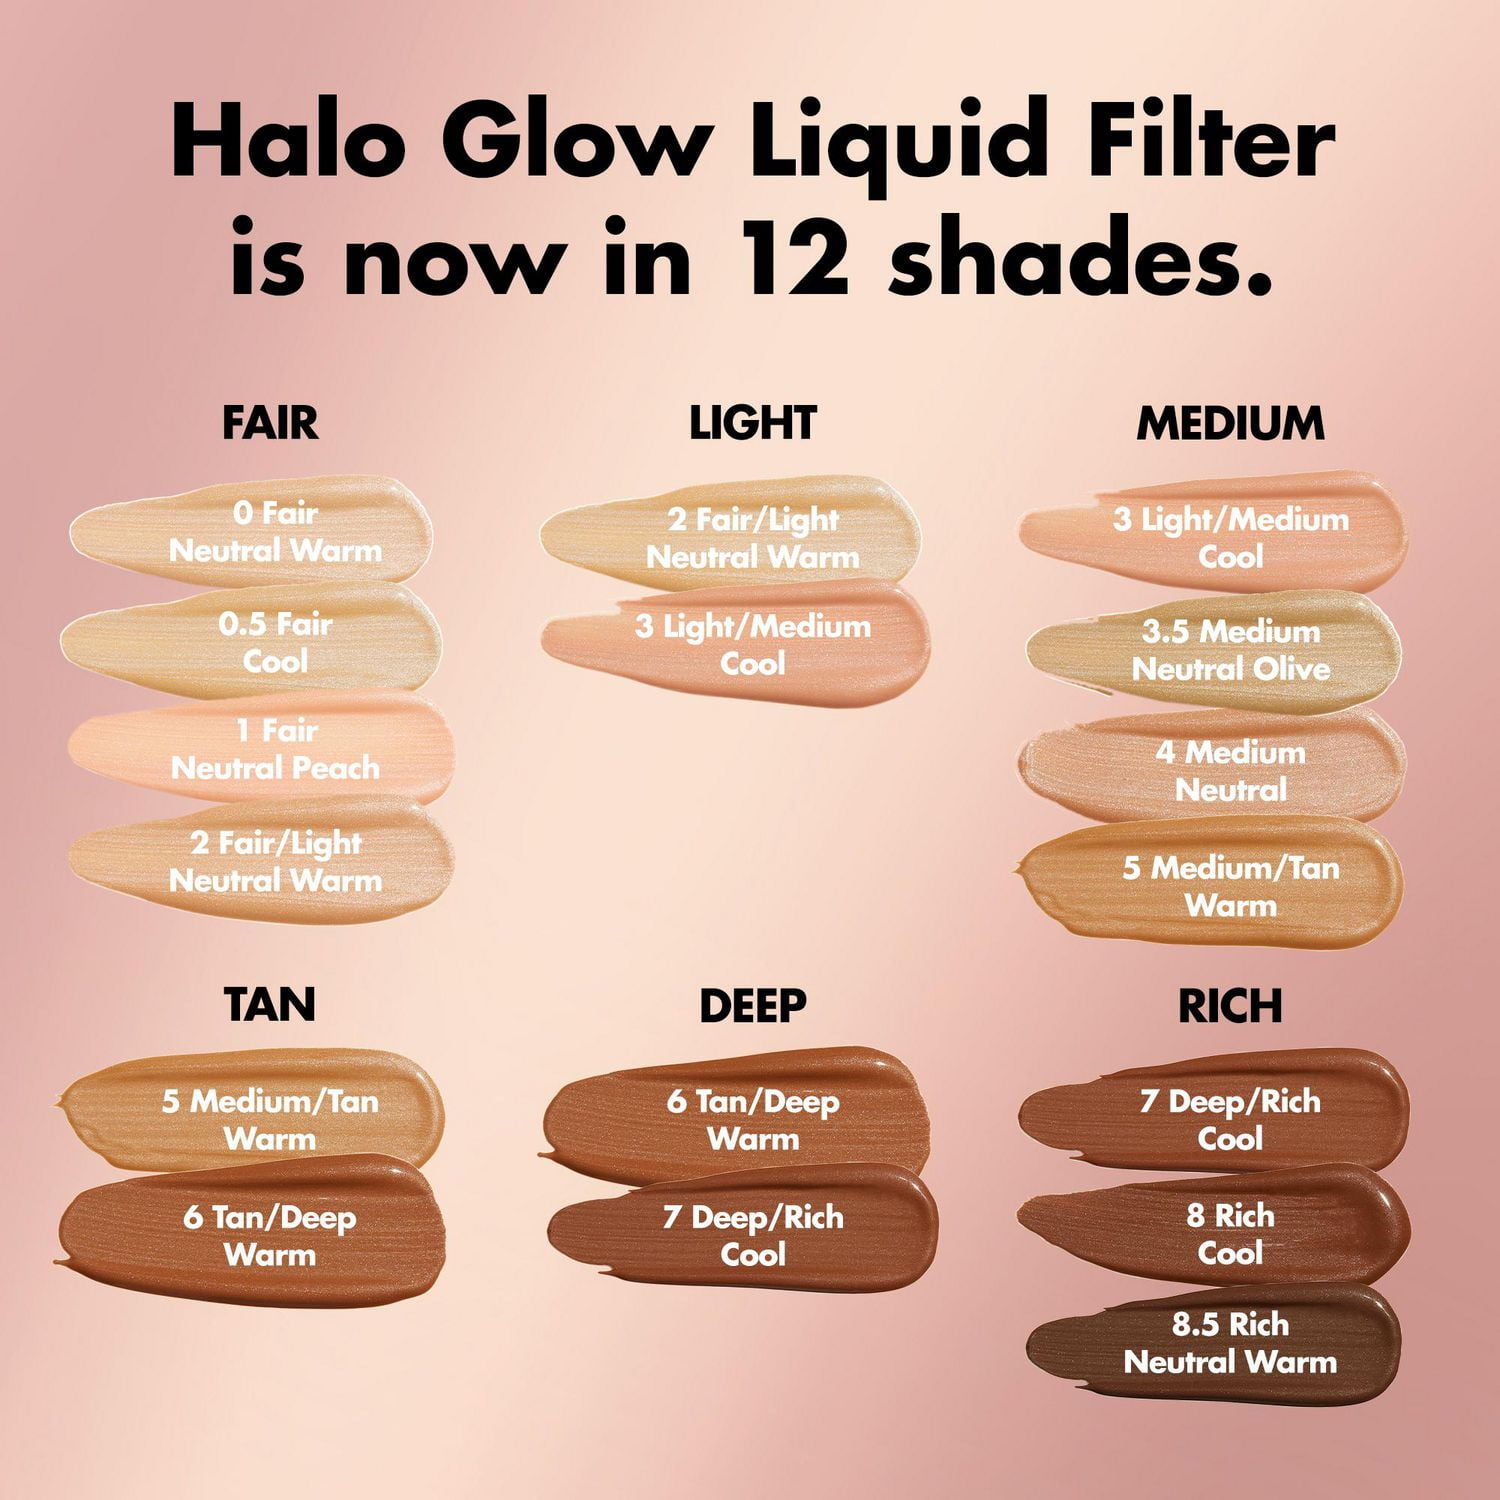 e.l.f. Cosmetics Halo Glow Liquid Filter, Complexion Booster For A Glowing,  Soft-Focus Look, Infused With Hyaluronic Acid, Vegan & Cruelty-Free. 31.5  ml 